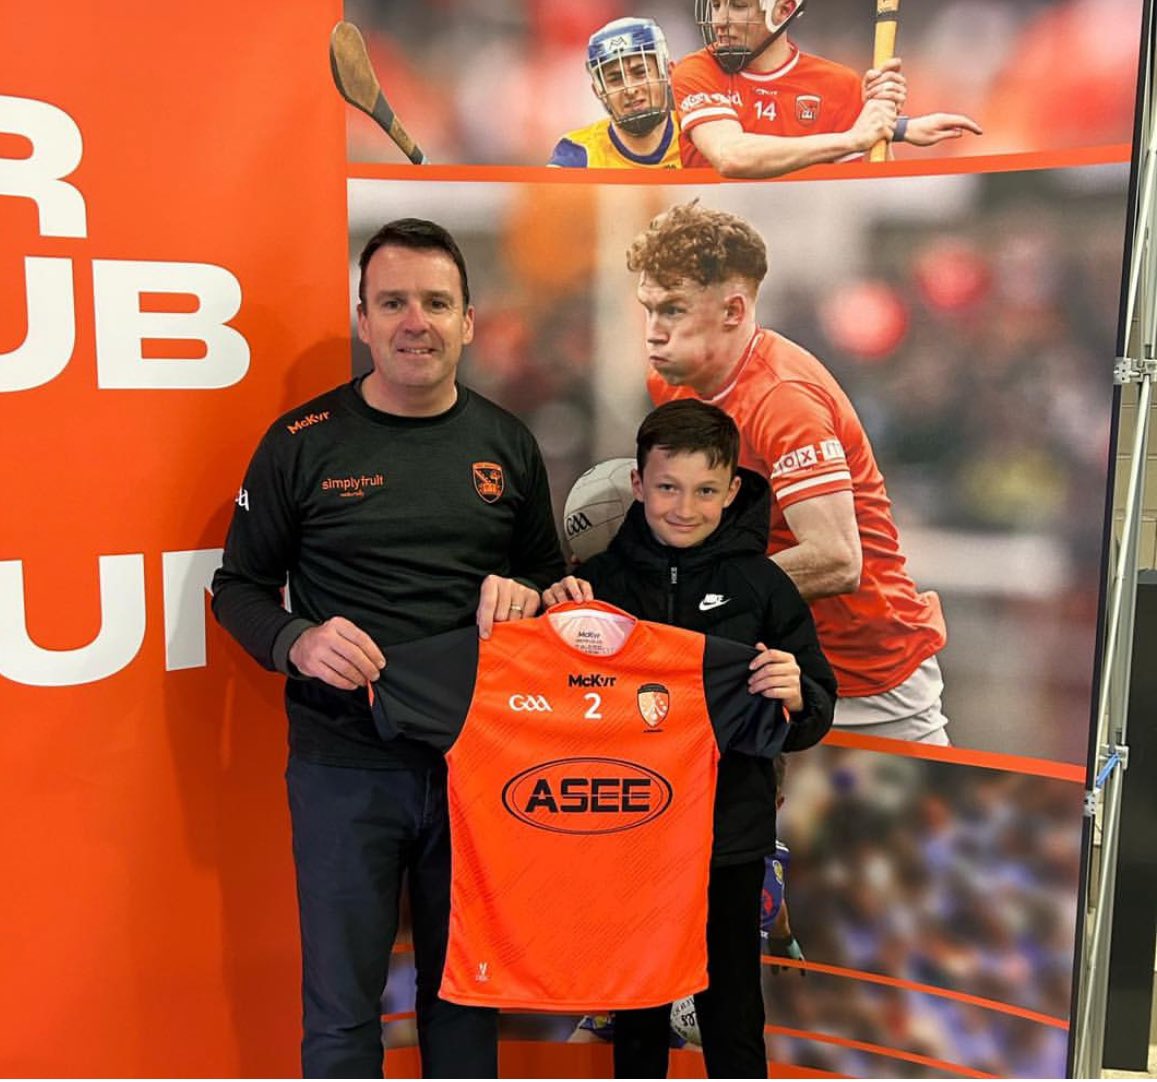 Keep an eye out for two future stars at half time in tomorrow’s Ulster Championship quarter final!

Good luck to Jake Lennon, Ryan Morgan and Blaine Hughes representing Carrickcruppen & Armagh v Fermanagh at Brewster Park.  
#ardmhachaabú #UTC